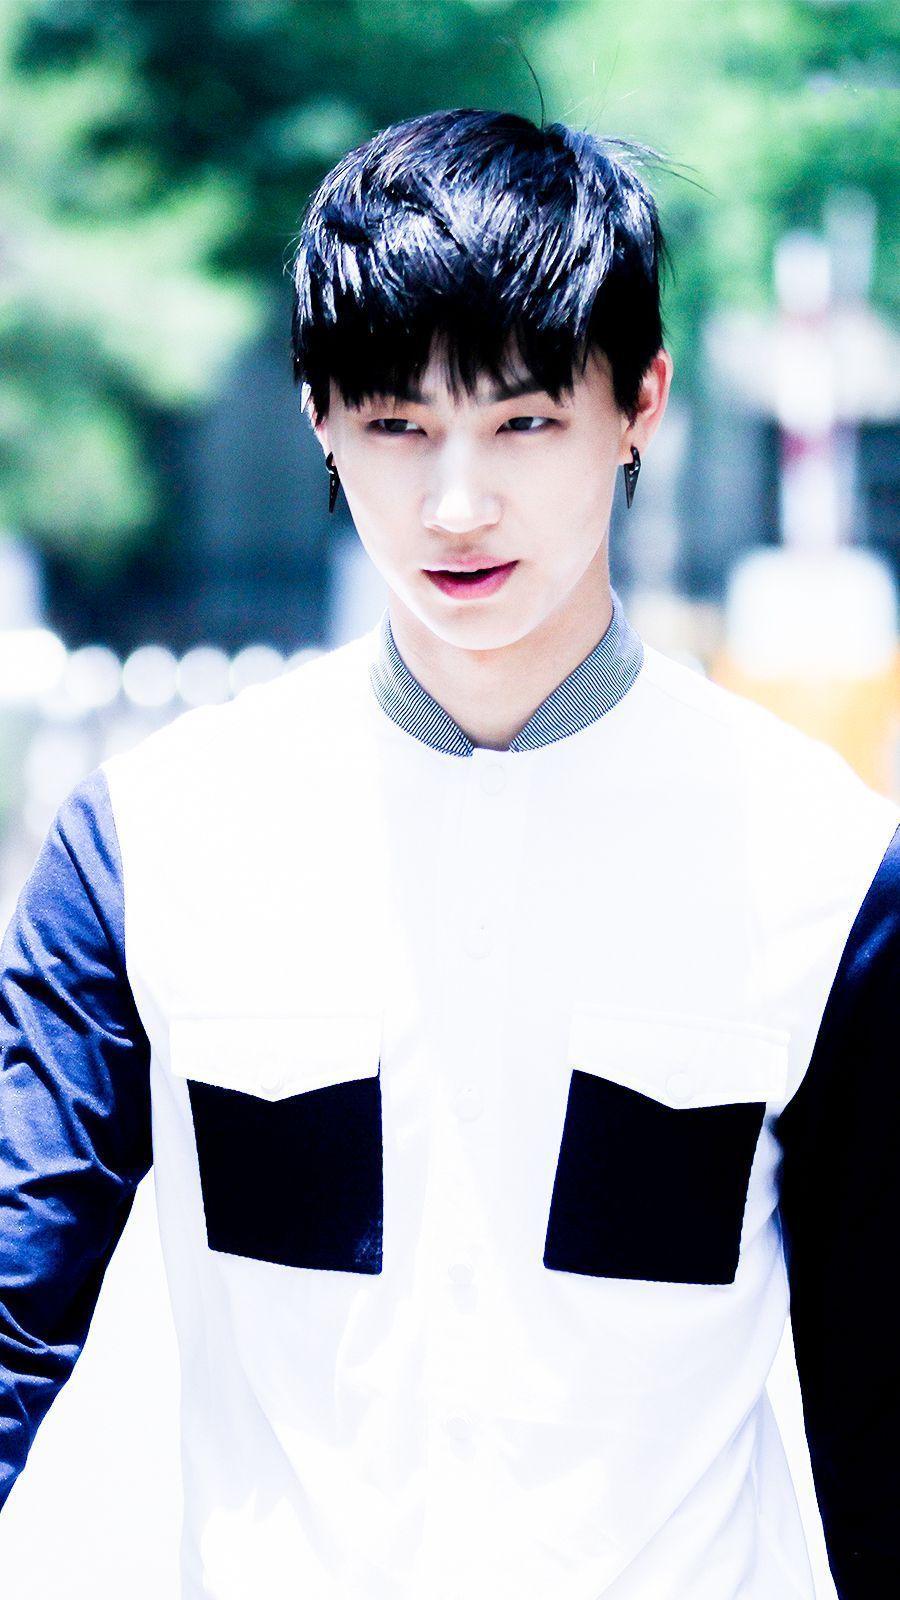 GOT7 JB wallpaper requested by sooo many people